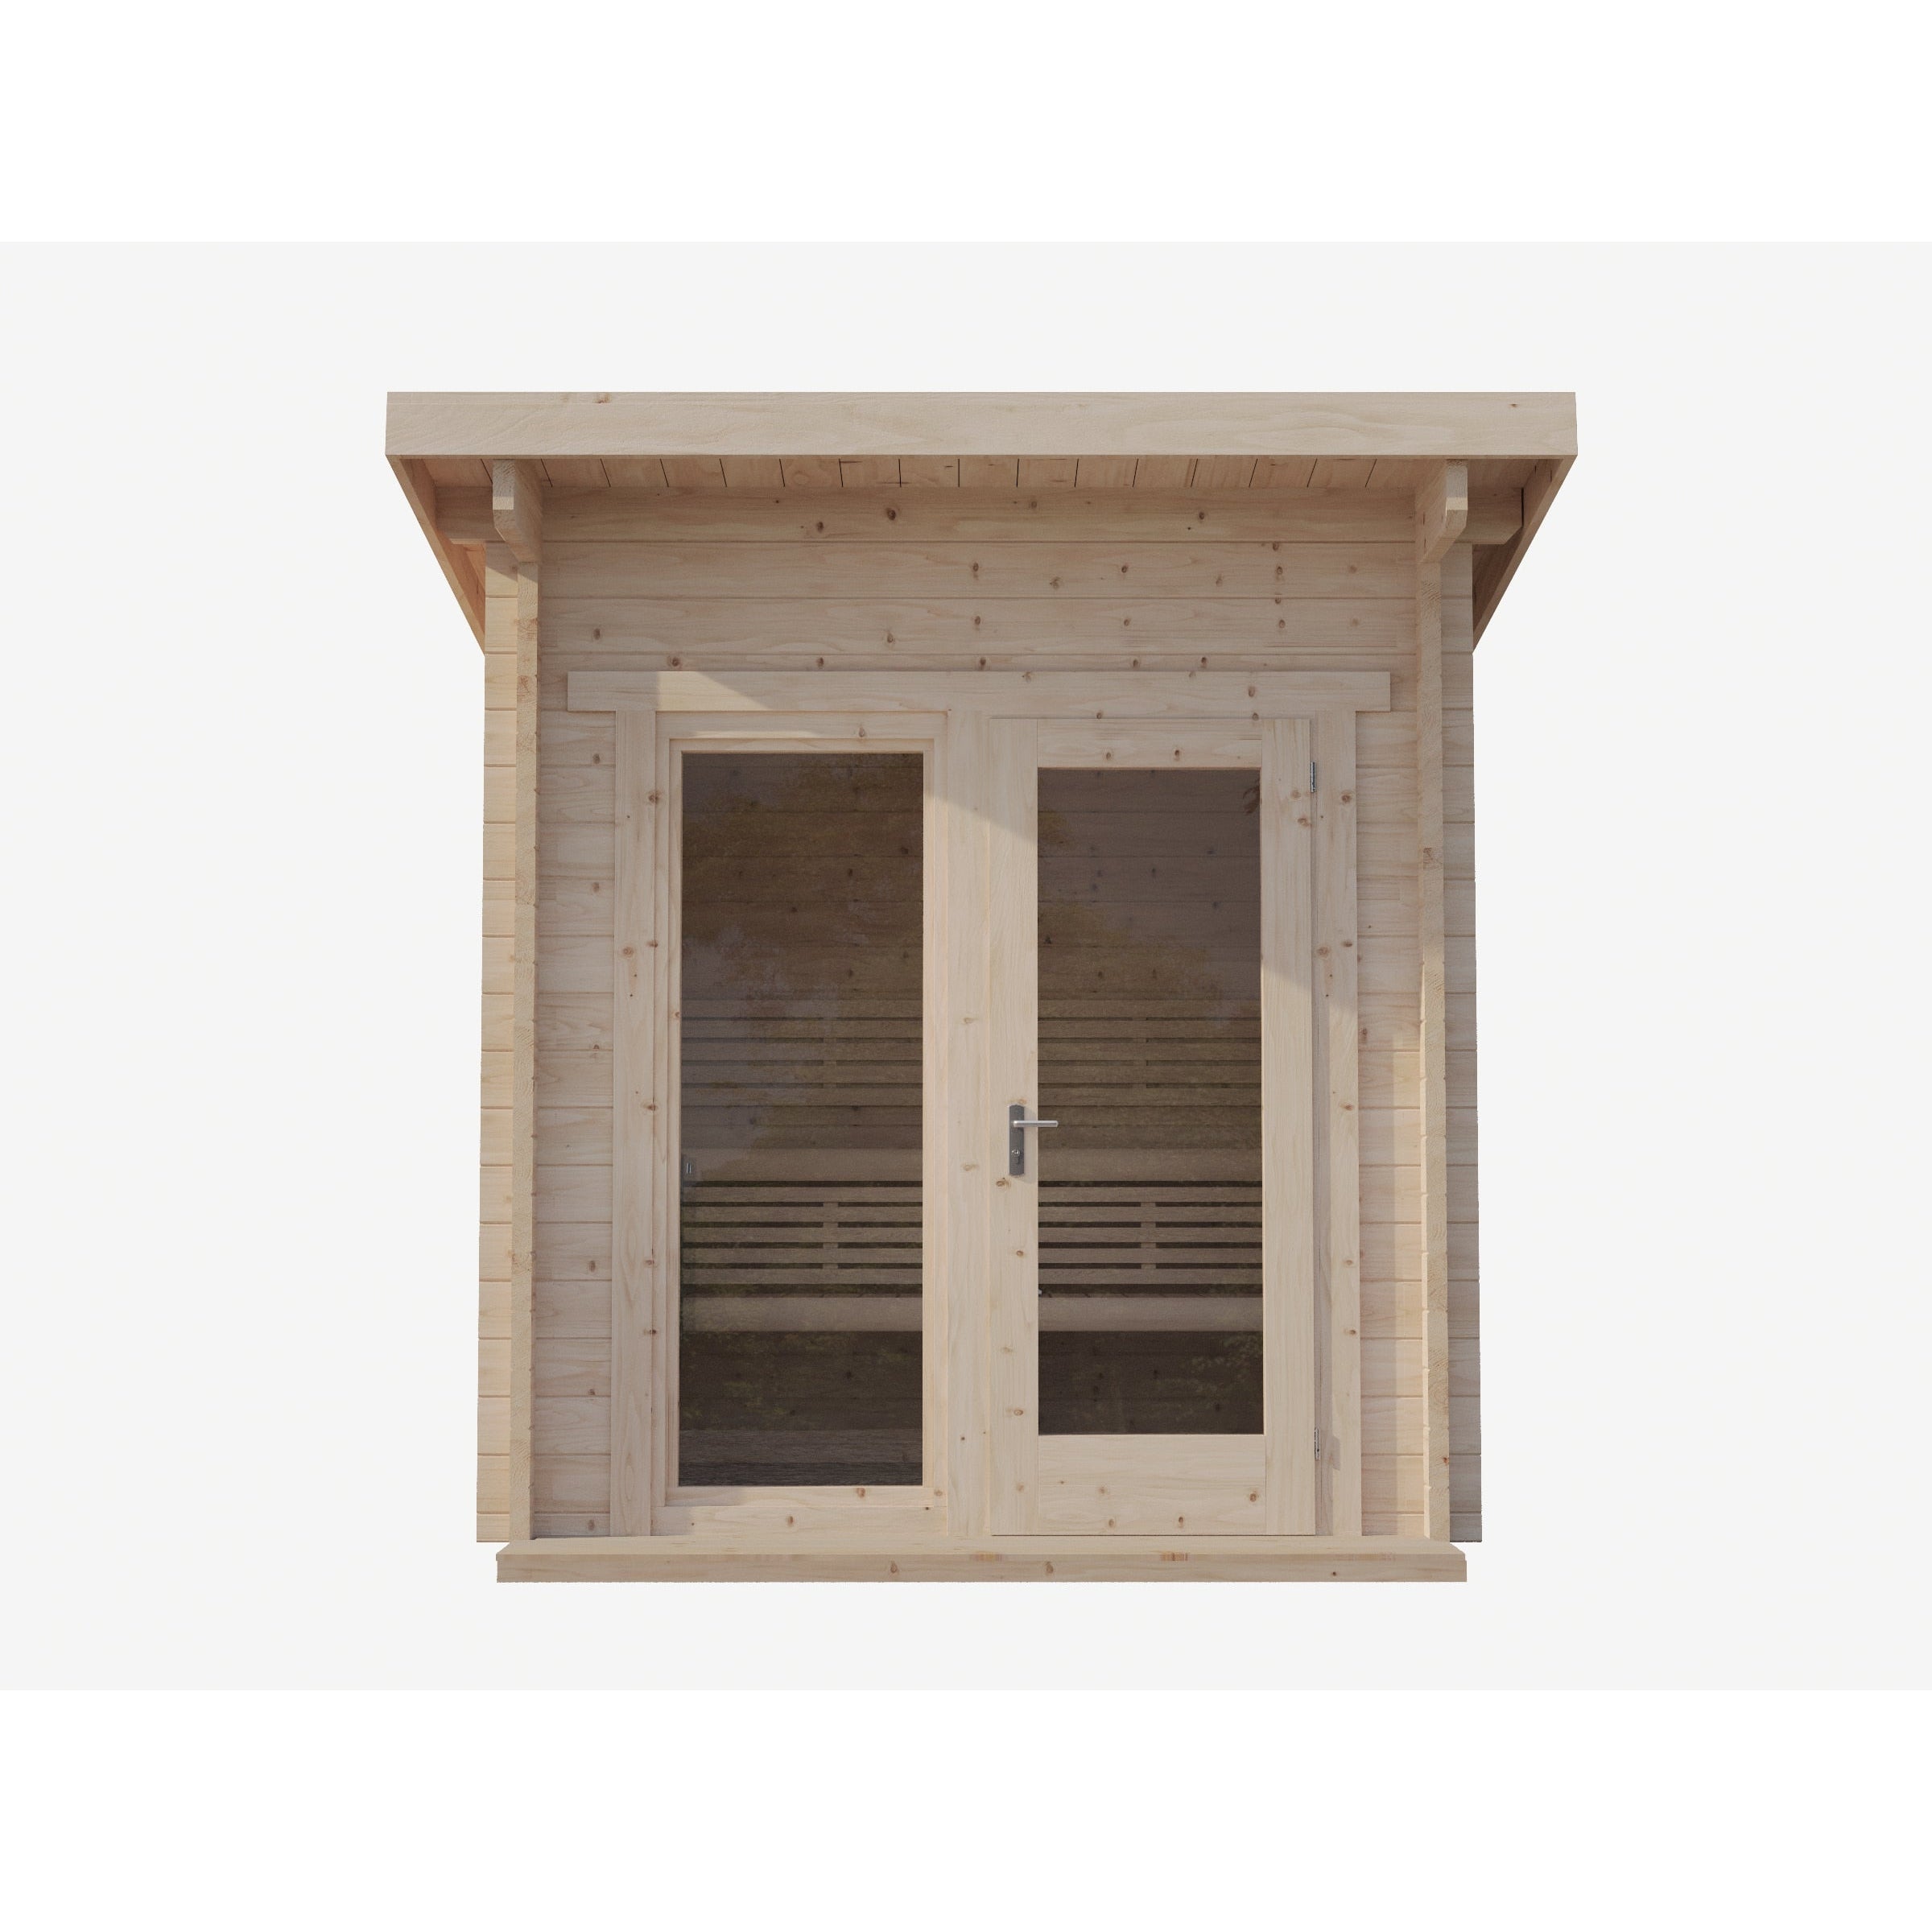 SaunaLife Model G4 Outdoor Home Sauna Kit - Purely Relaxation